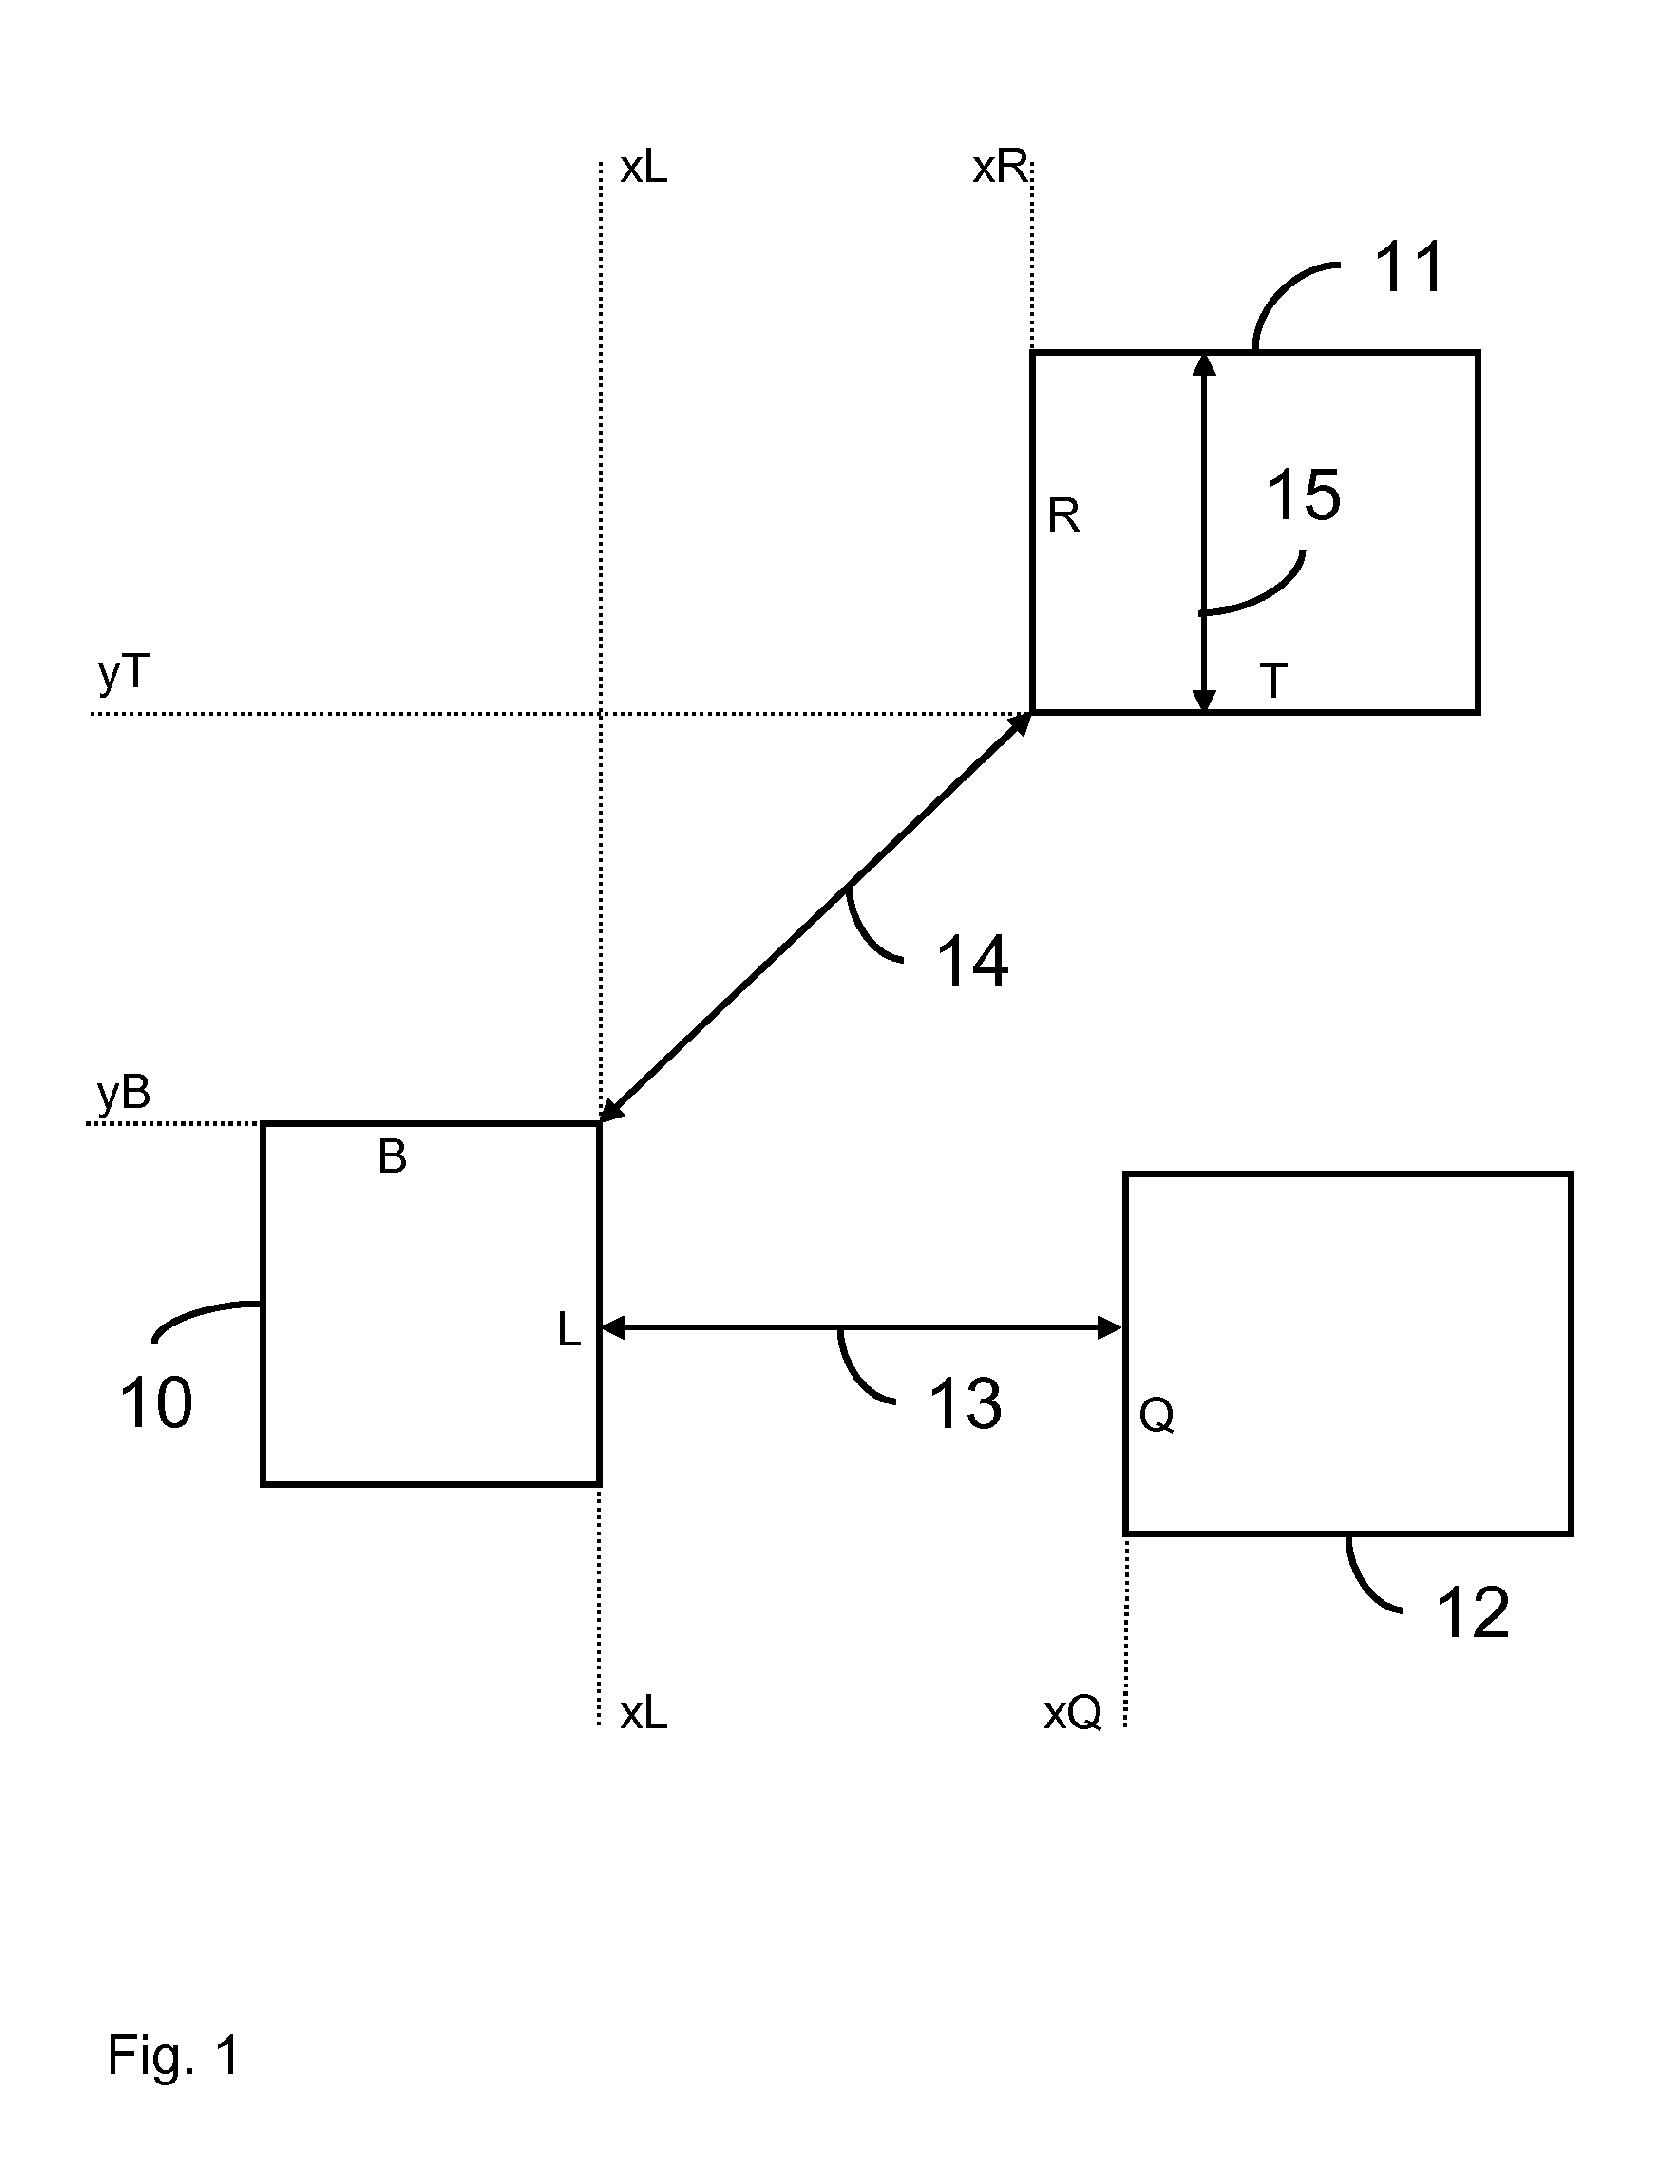 Semiconductor layout modification method based on design rule and user constraints